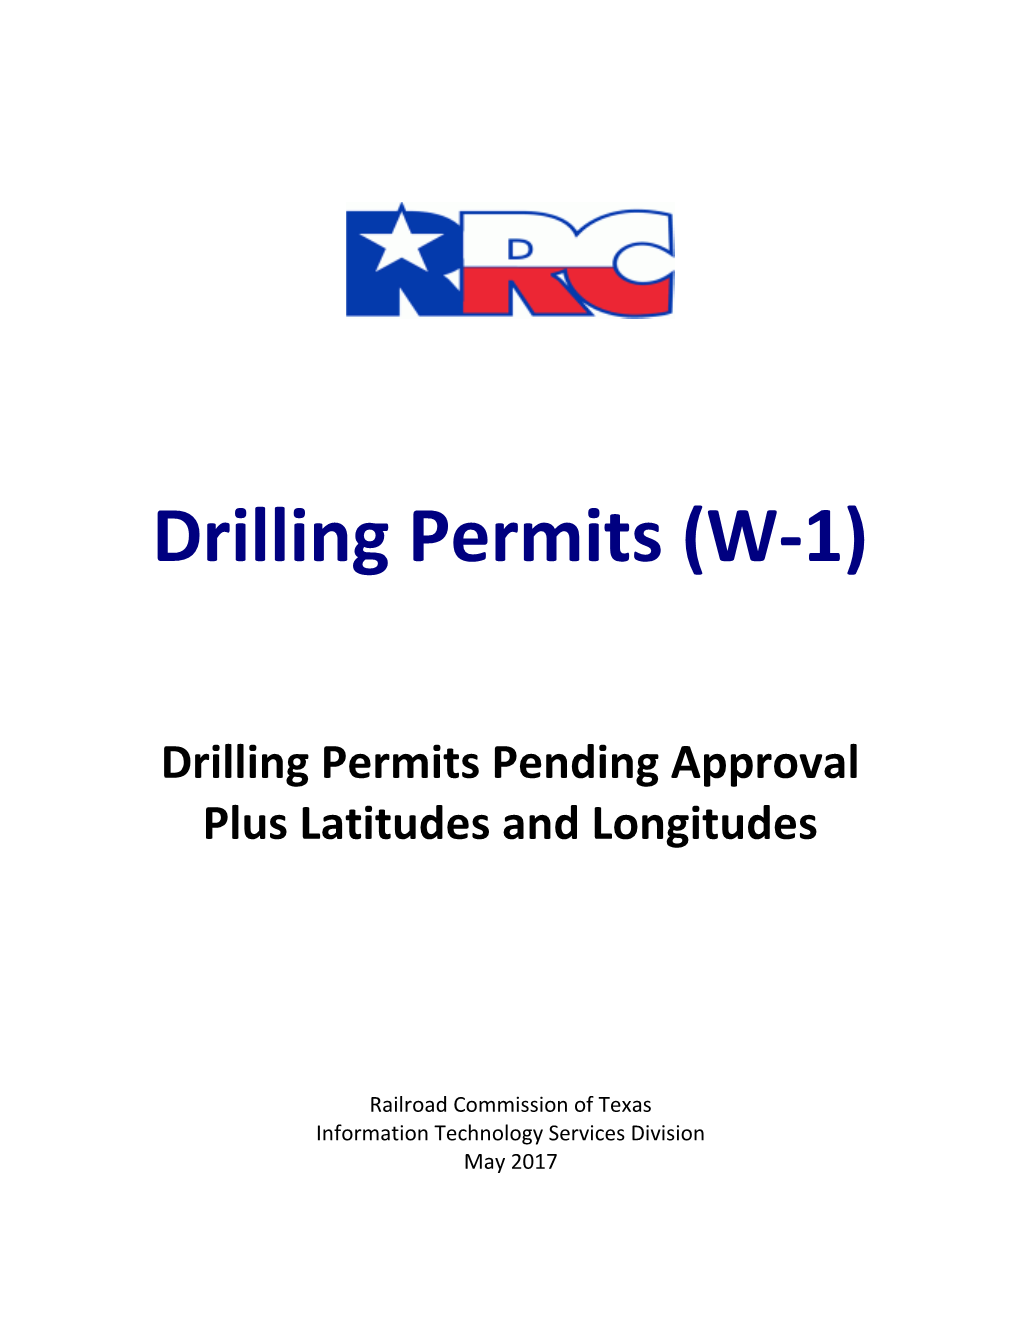 Drilling Permits Pending Approval Plus Latitudes and Longitudes